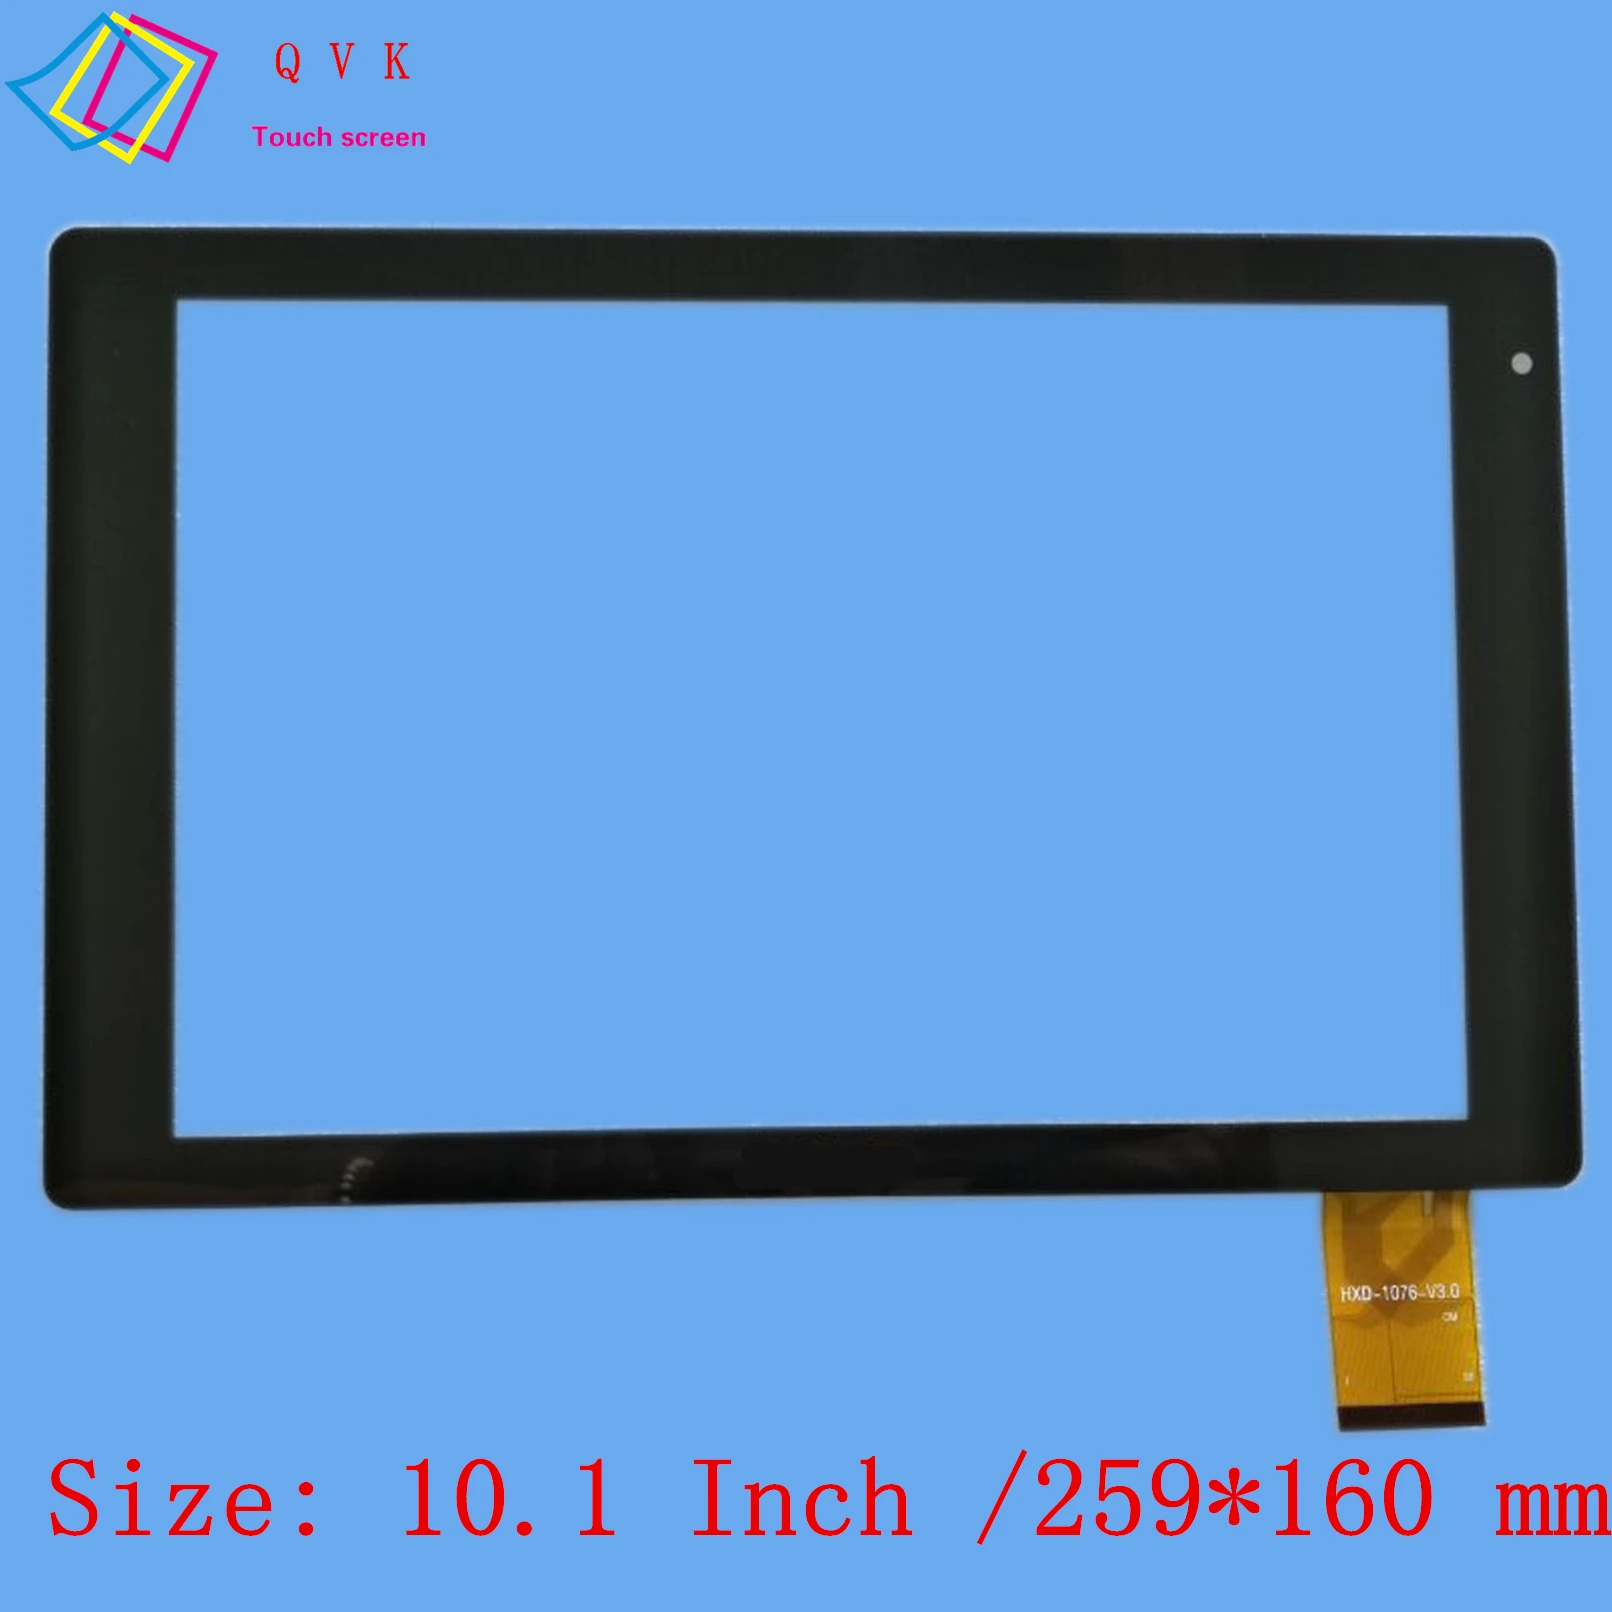 Original New 10.1'' HXD-1076-V3.0 Touch Screen Digitizer Tablet New Replacement 